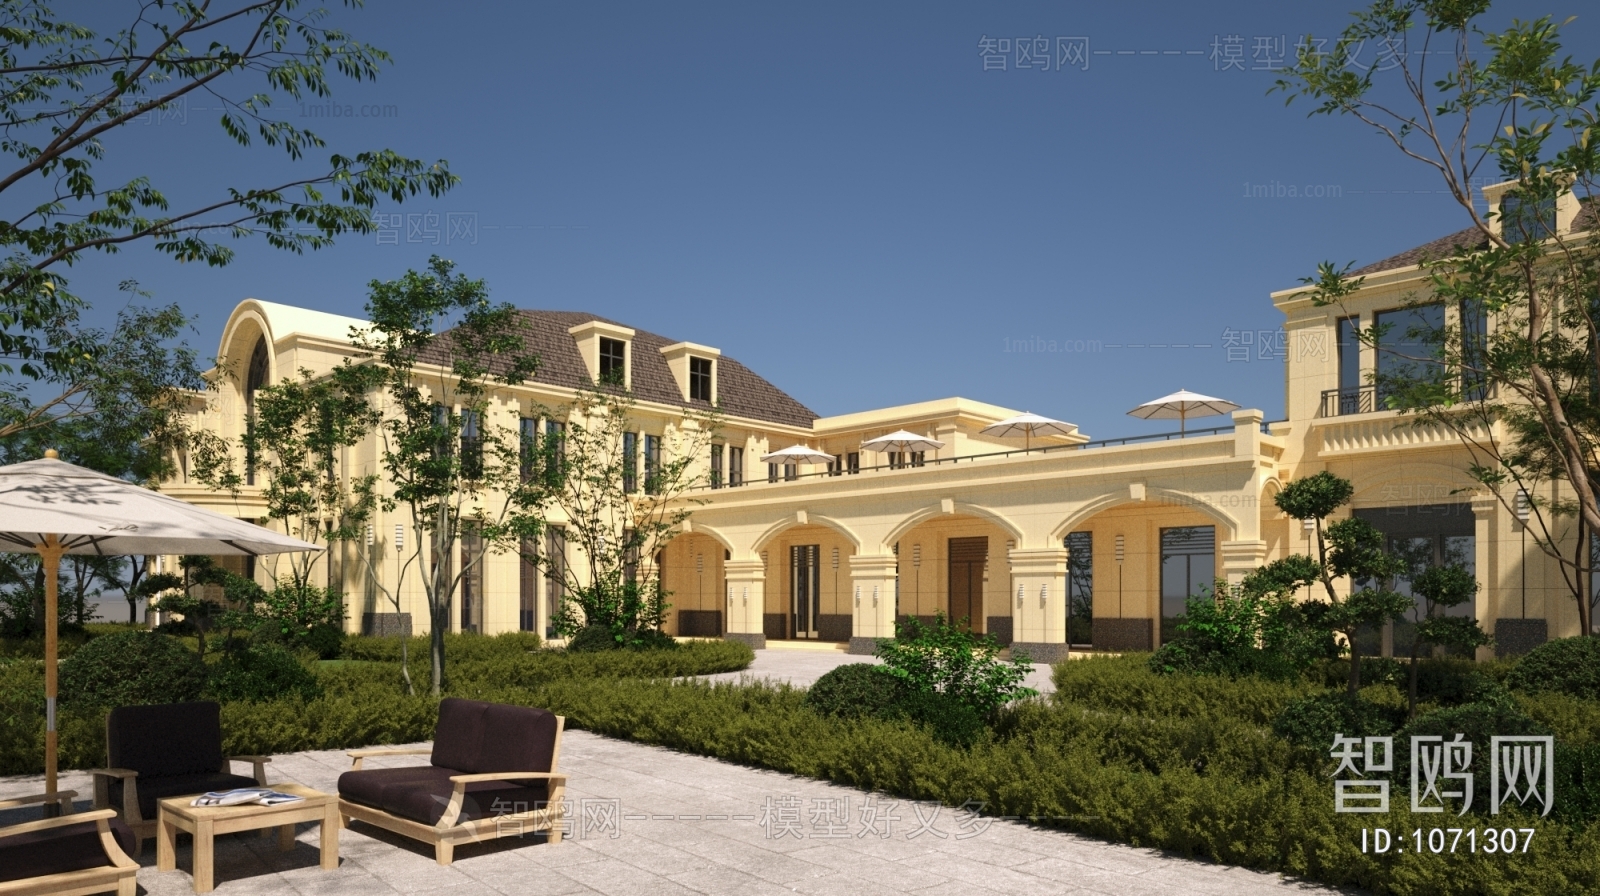 French Style Villa Appearance